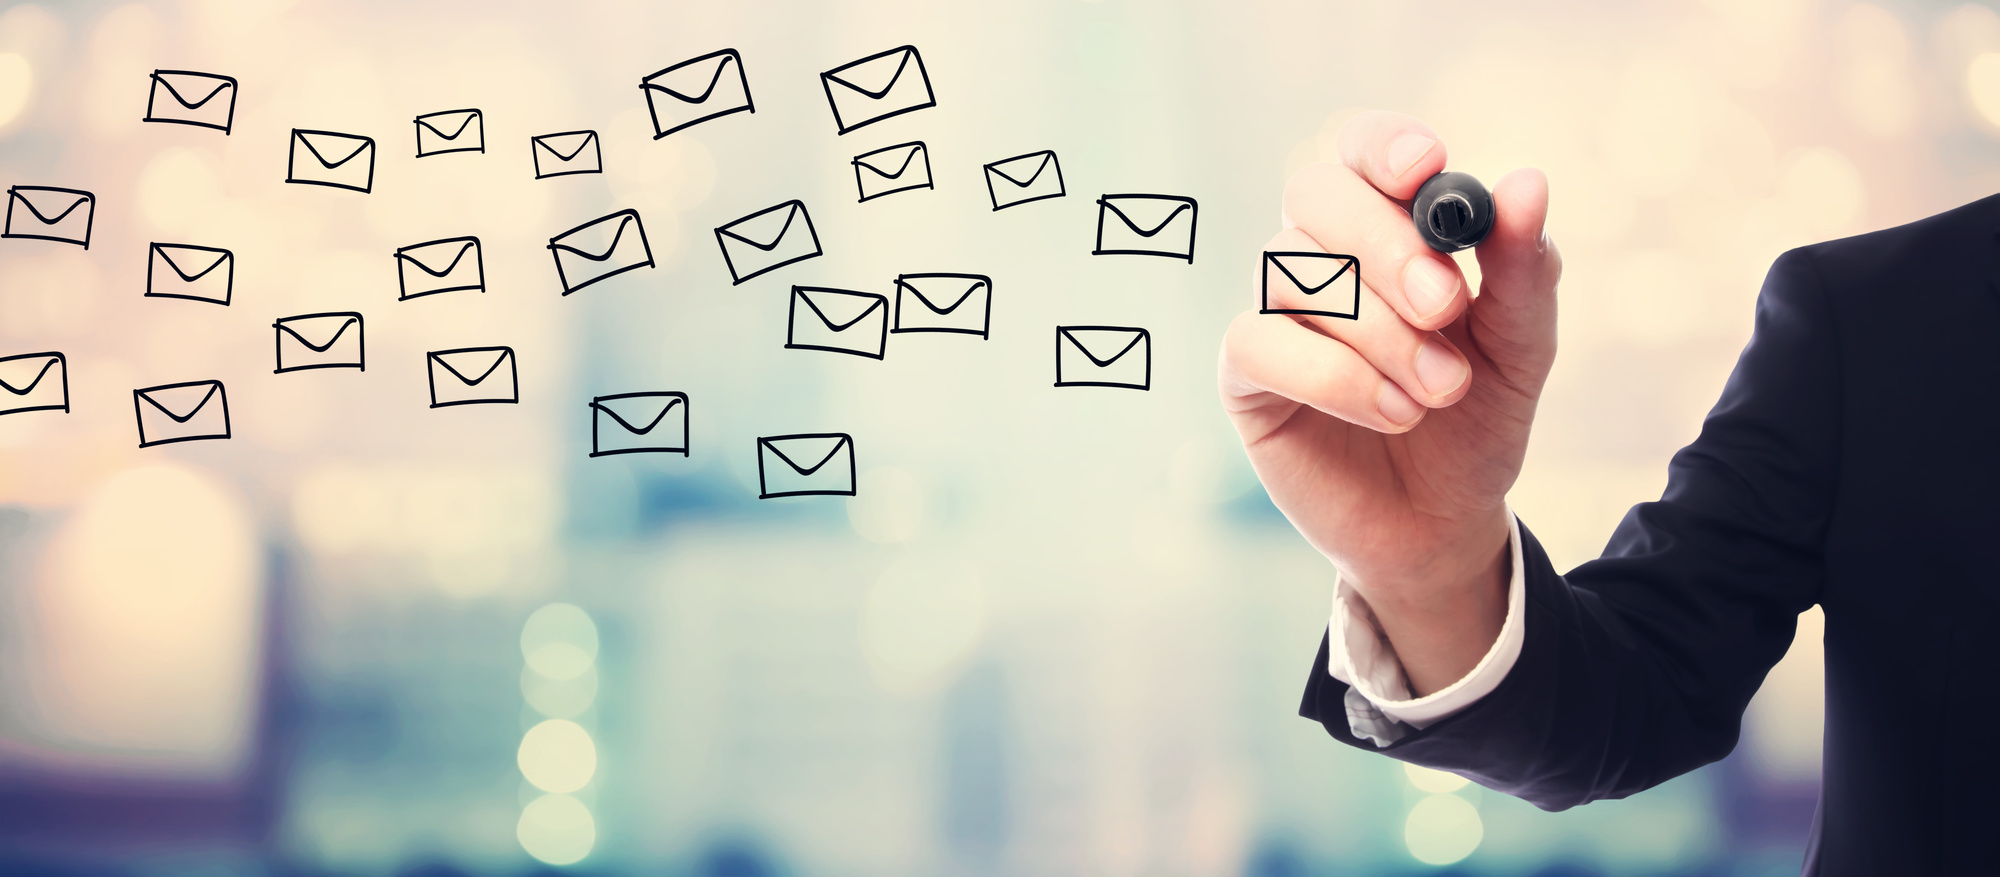 5 Reasons Why Your Email Marketing Strategy Isn’t Working